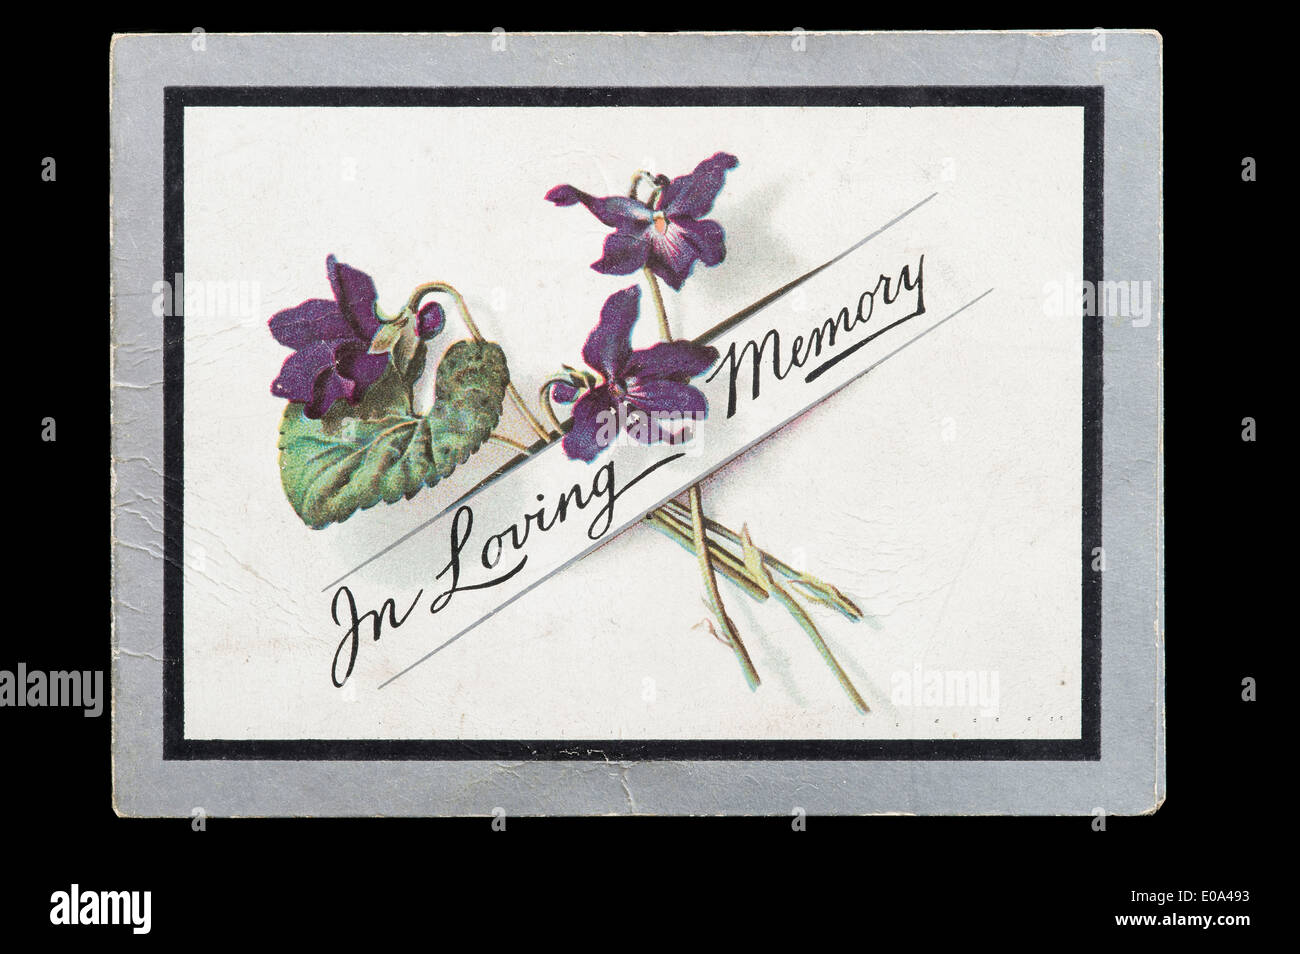 Worn Memorial Cards, Early 20th Century Stock Photo